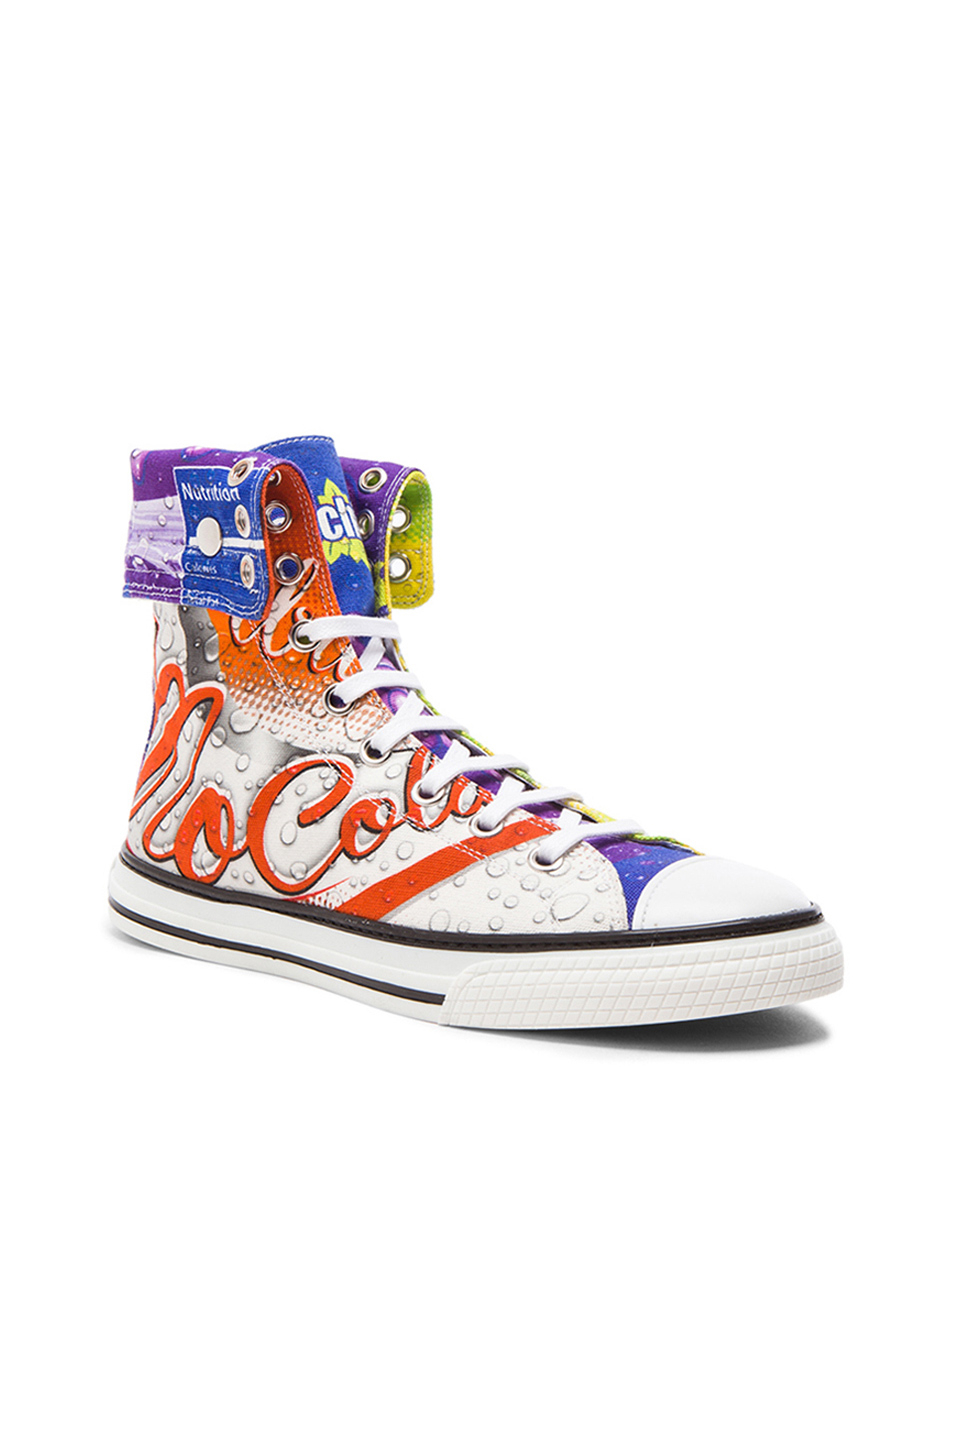 Download Lyst - Moschino Mocola-Print High-Top Sneakers